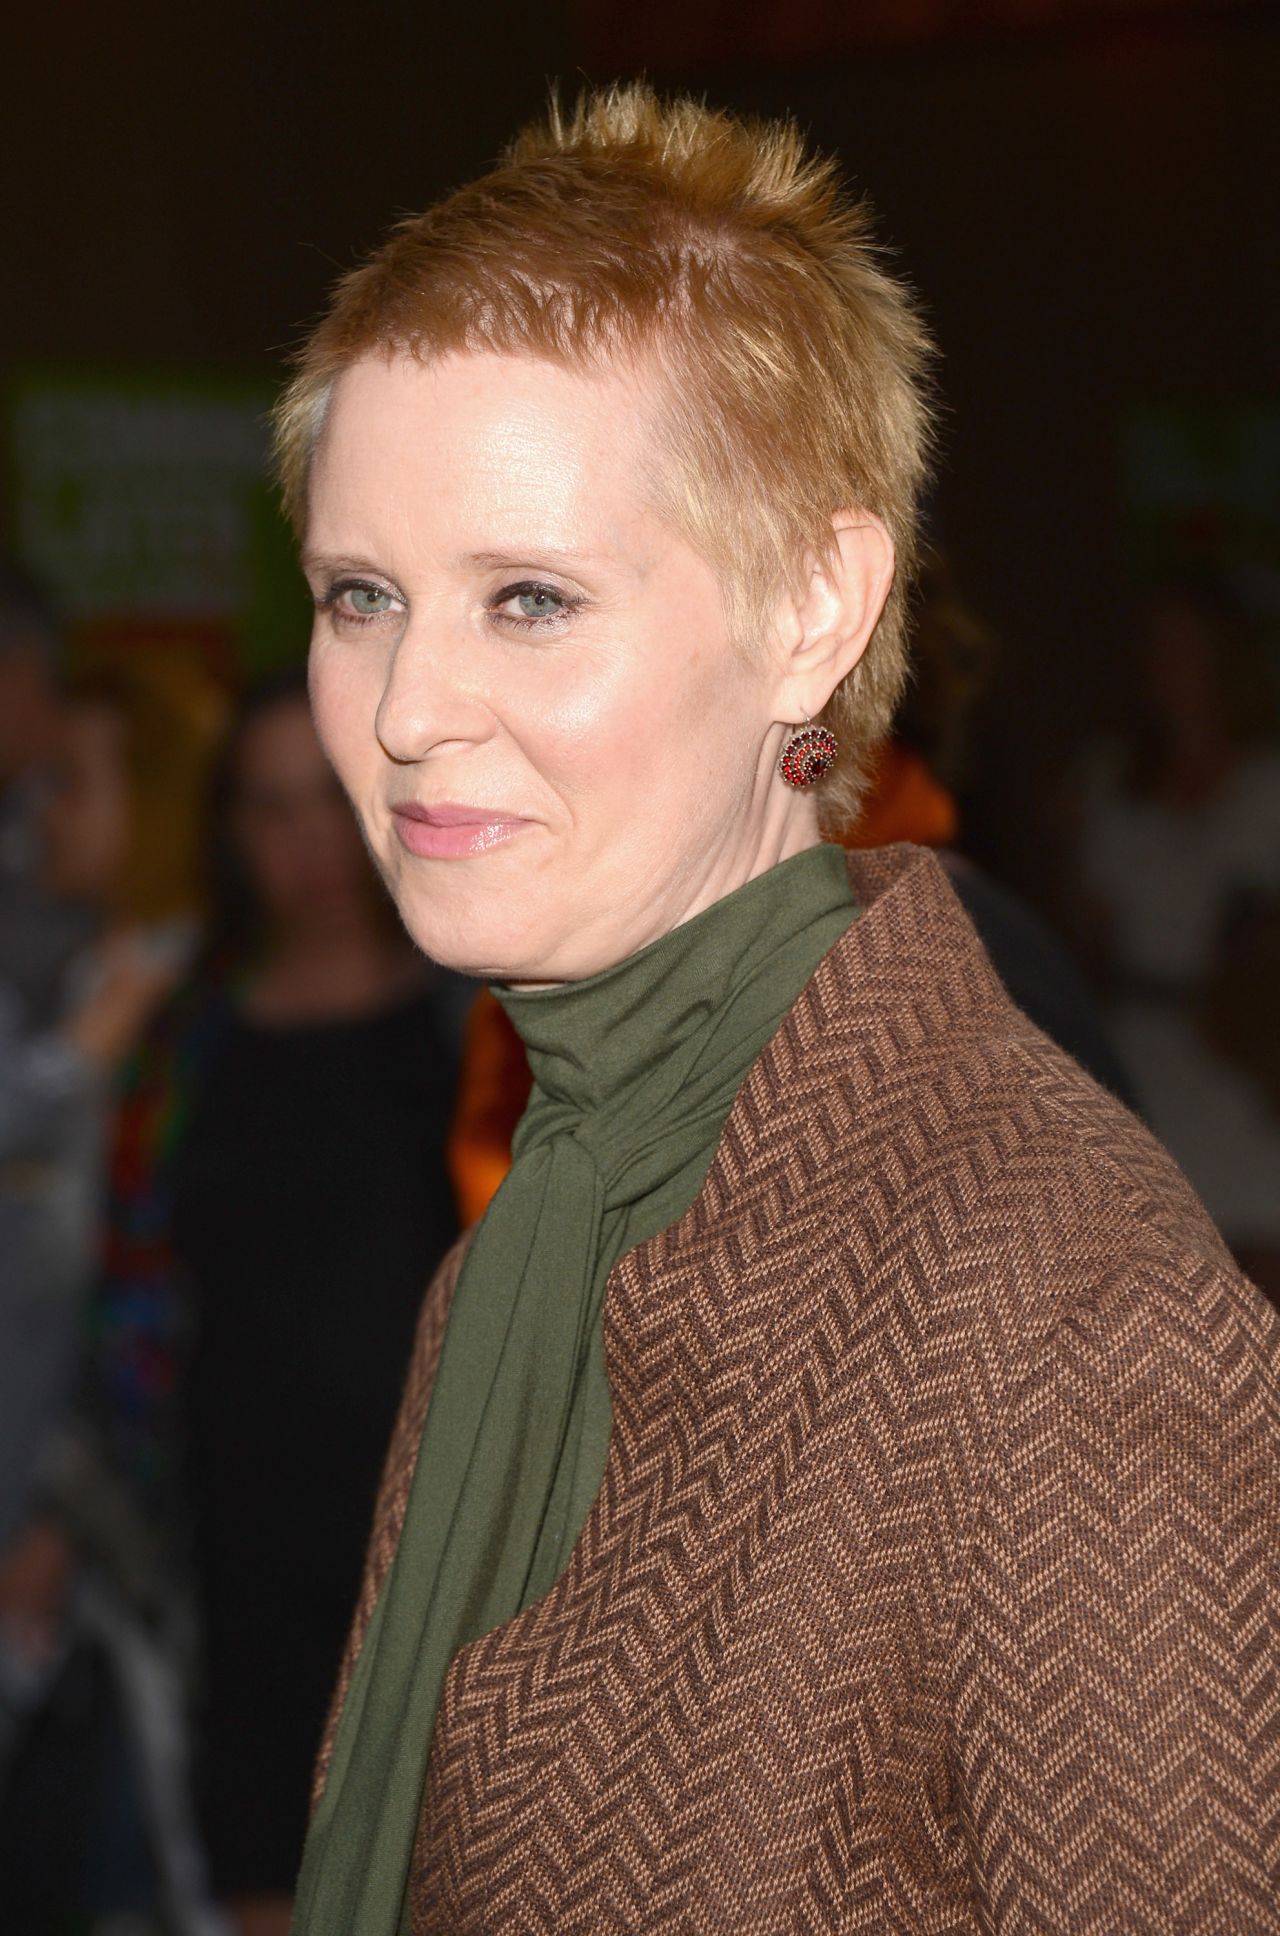 Reports of "Sex and the City" star Cynthia Nixon's relationship with Christine Marinoni surfaced in 2004, six years after the television show's premiere. Nixon discussed her relationship with New York Magazine in 2006, saying, "I never felt like there was an unconscious part of me around that woke up or that came out of the closet; there wasn't a struggle; there wasn't an attempt to suppress. I met this woman, I fell in love with her, and I'm a public figure."